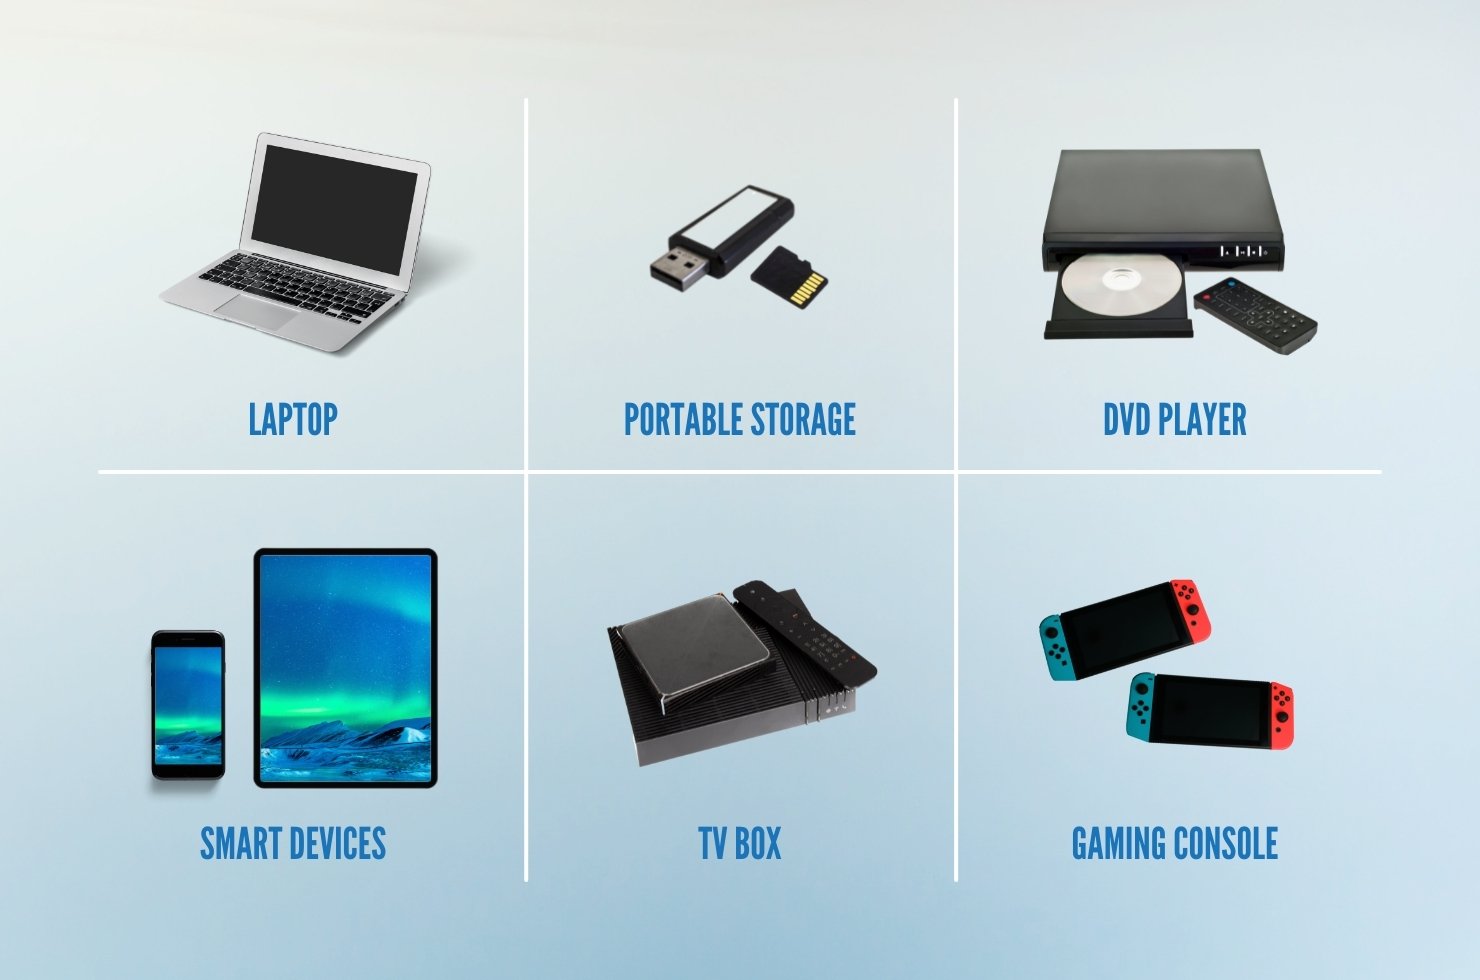 Can connnect to multiple devices - image of laptop/USB drive/microSd/dvd player/smart devices/tv box/gaming consoles